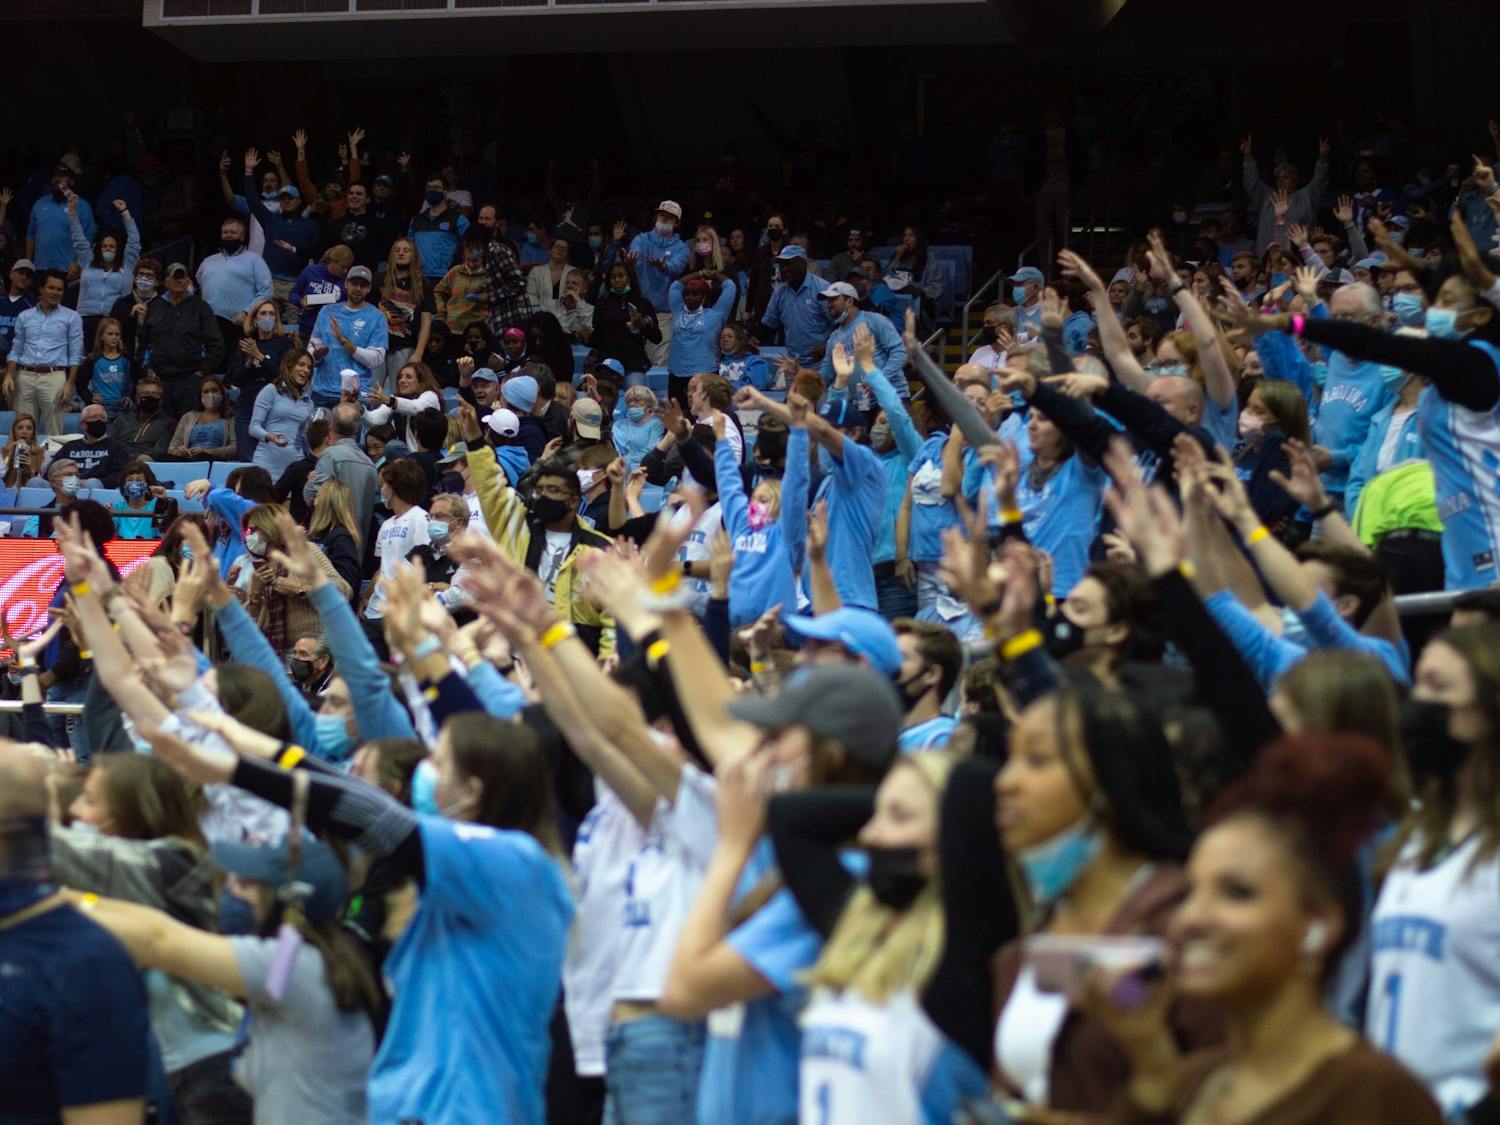 Fans raise their arms during the t-shirt toss at the UNC men's baksetball exhbition game against Elizabeth City State on Nov. 5 2021 at the Dean E. Smith Center in Chapel Hill.